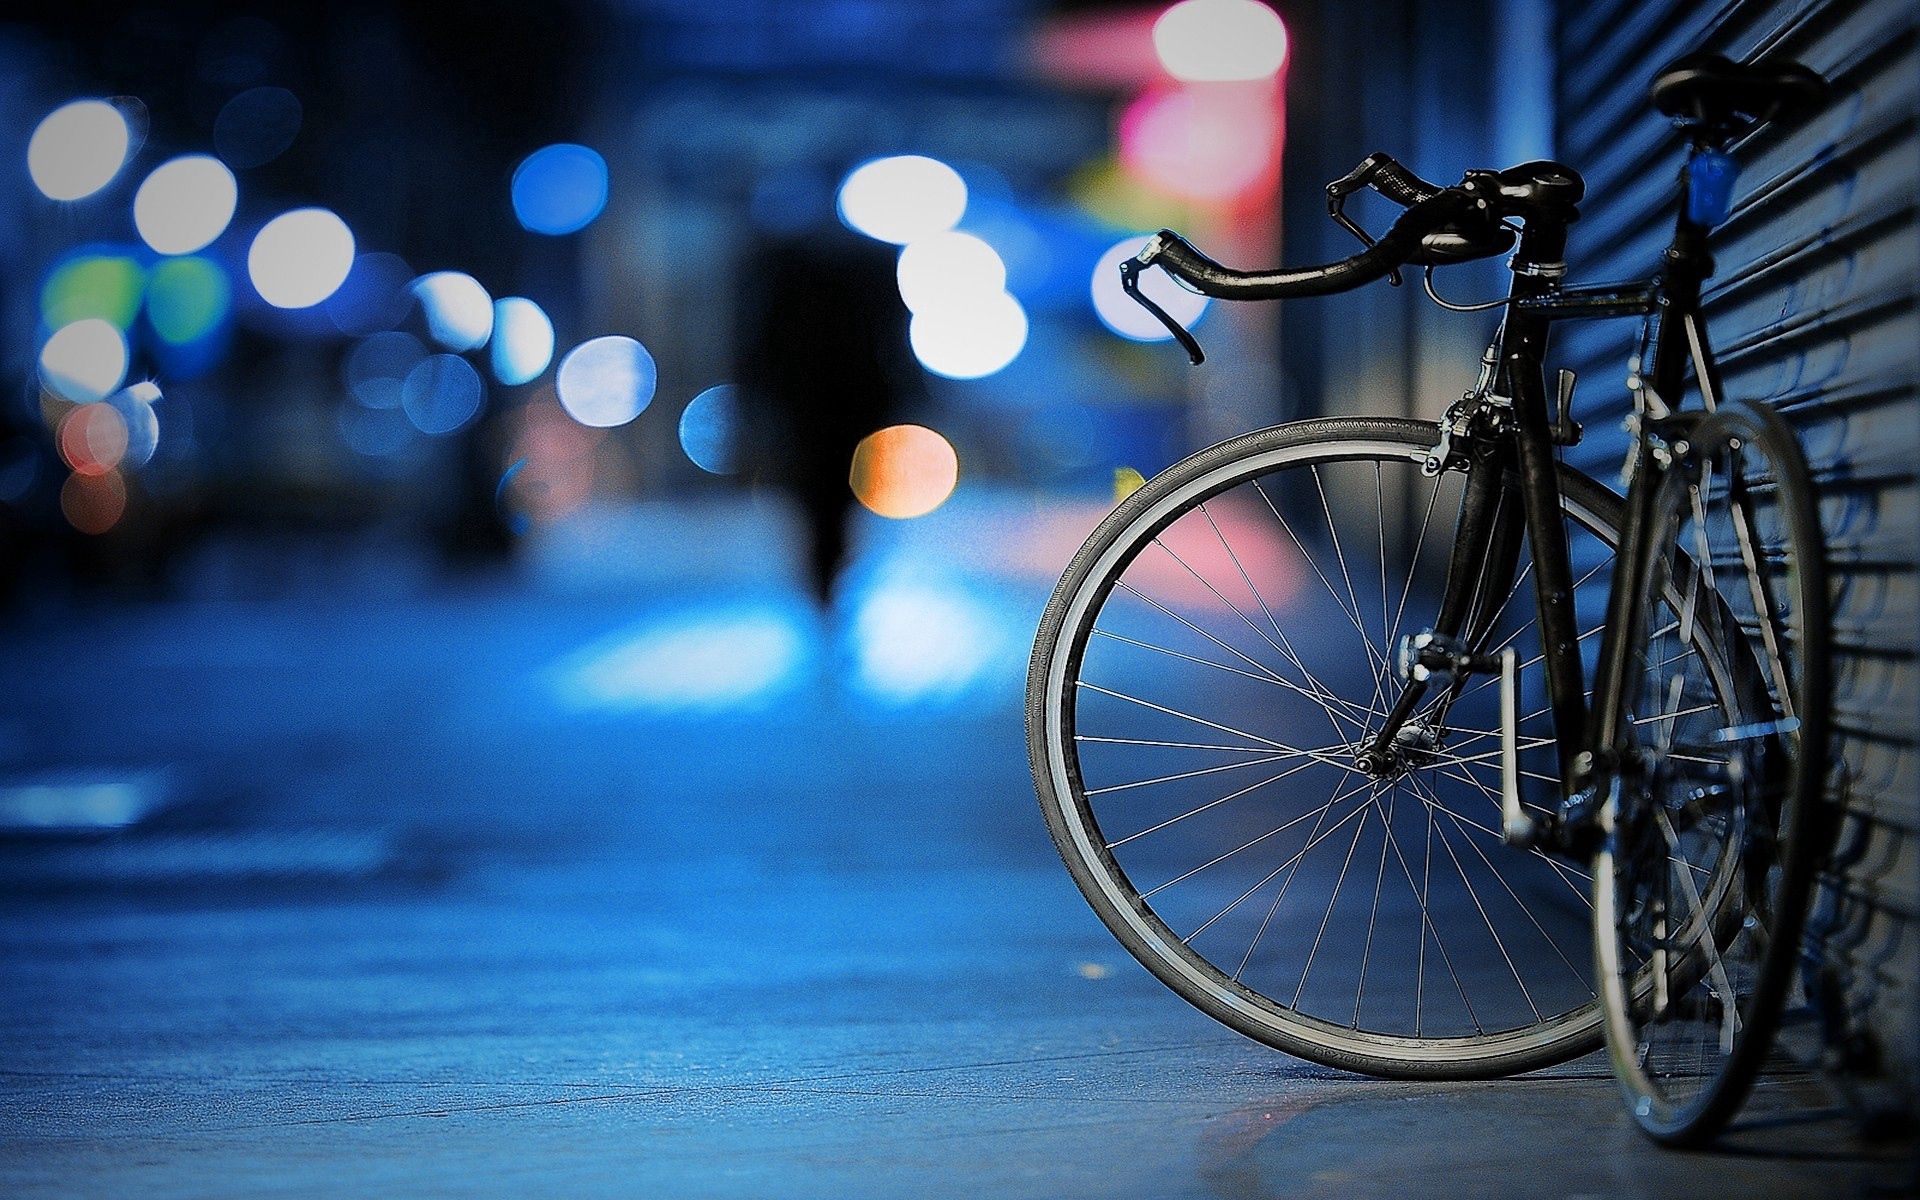 android bicycle, miscellanea, miscellaneous, wall, evening, street